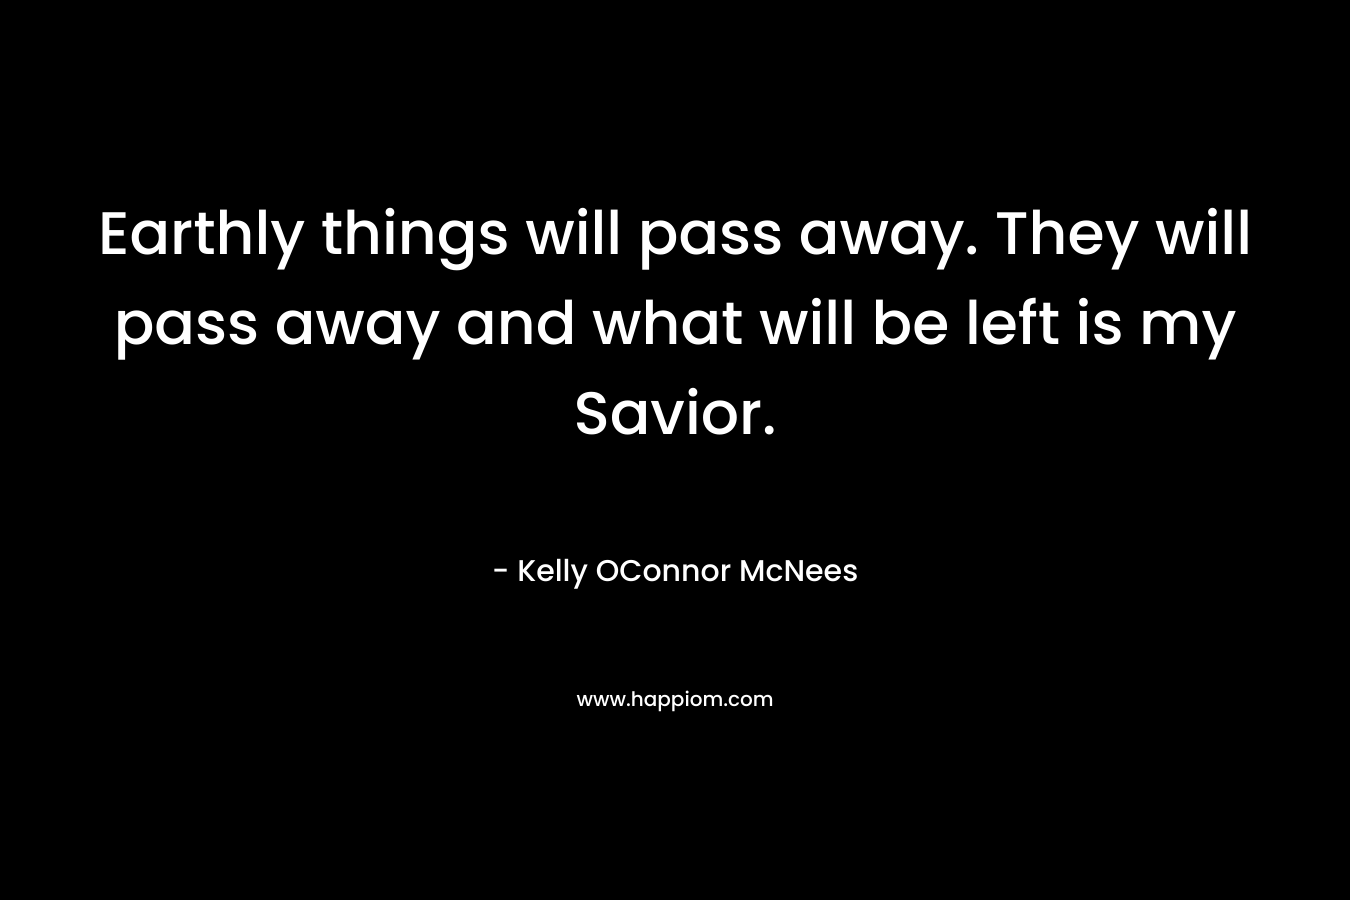 Earthly things will pass away. They will pass away and what will be left is my Savior.